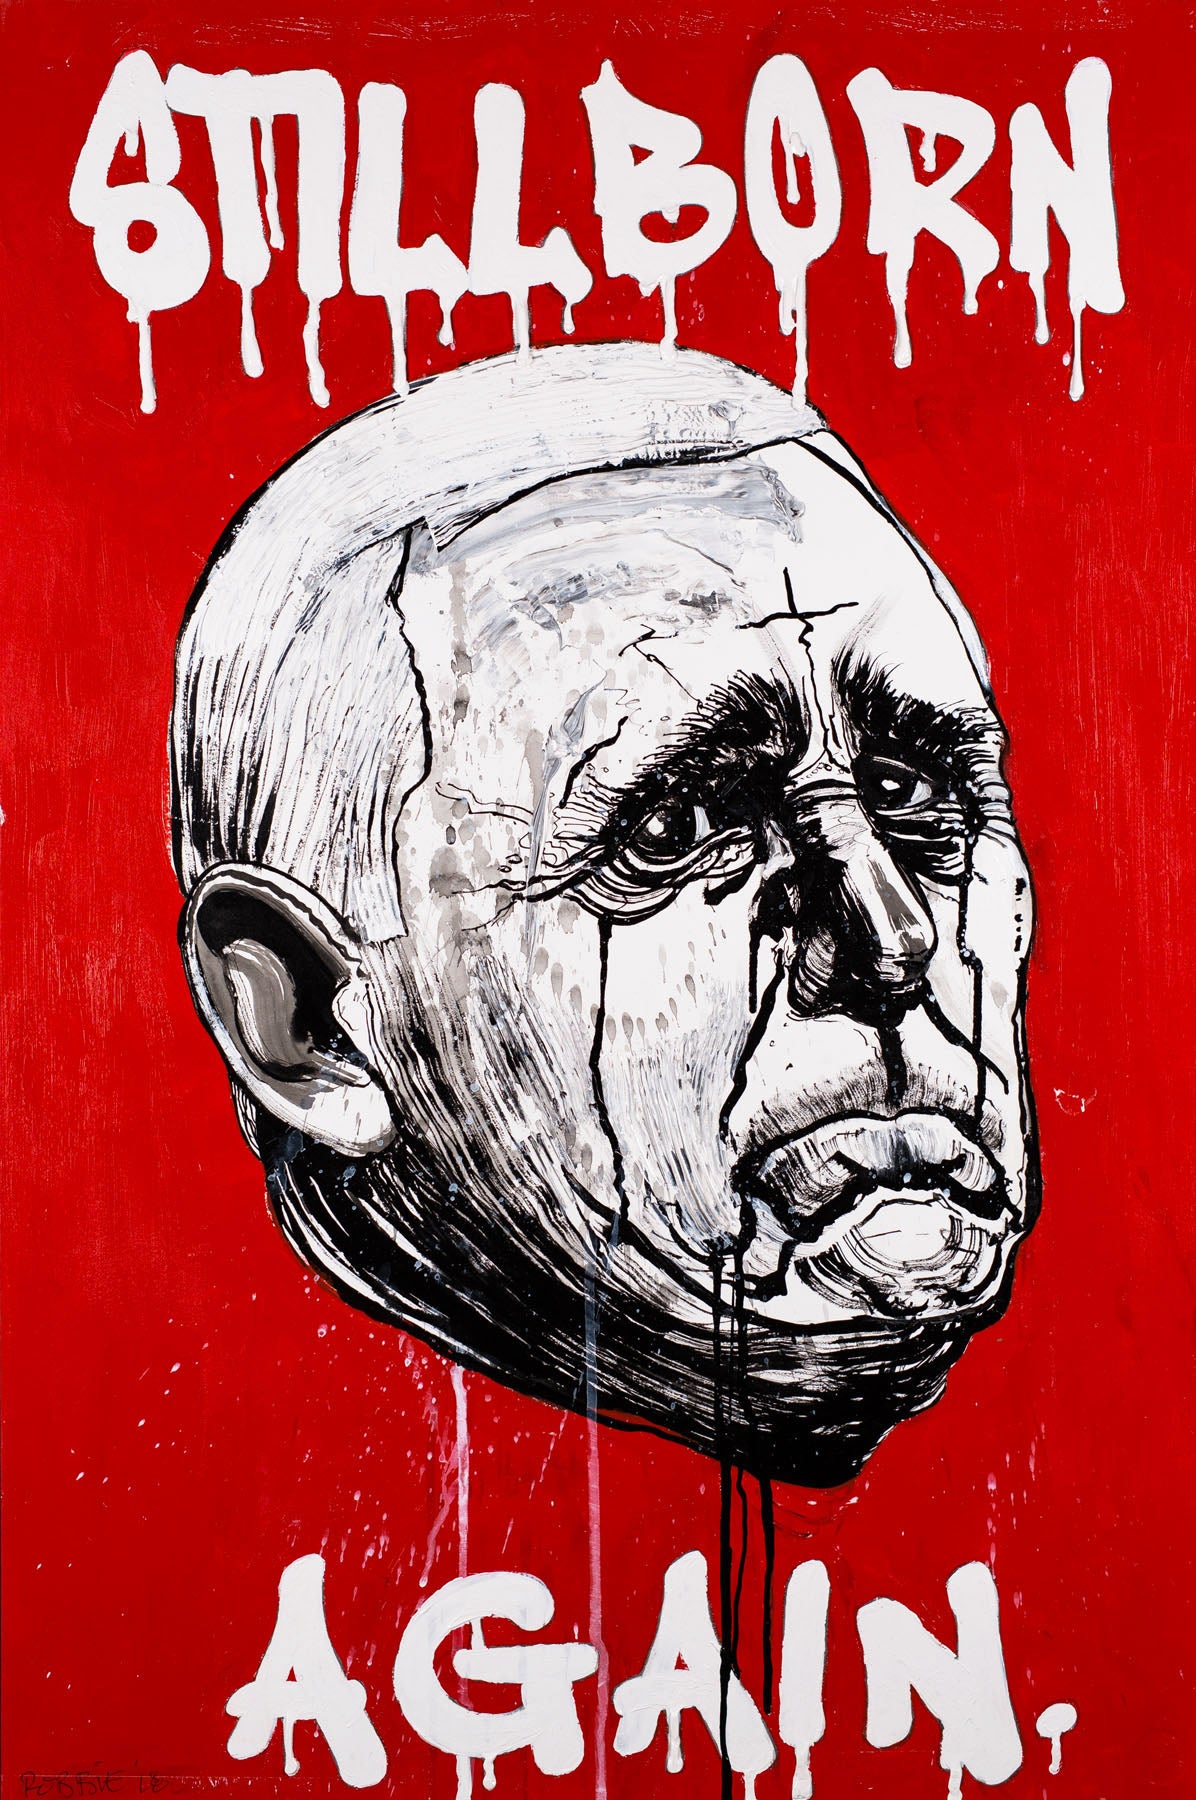 Robbie Conal ~ Mike Pence, 2018